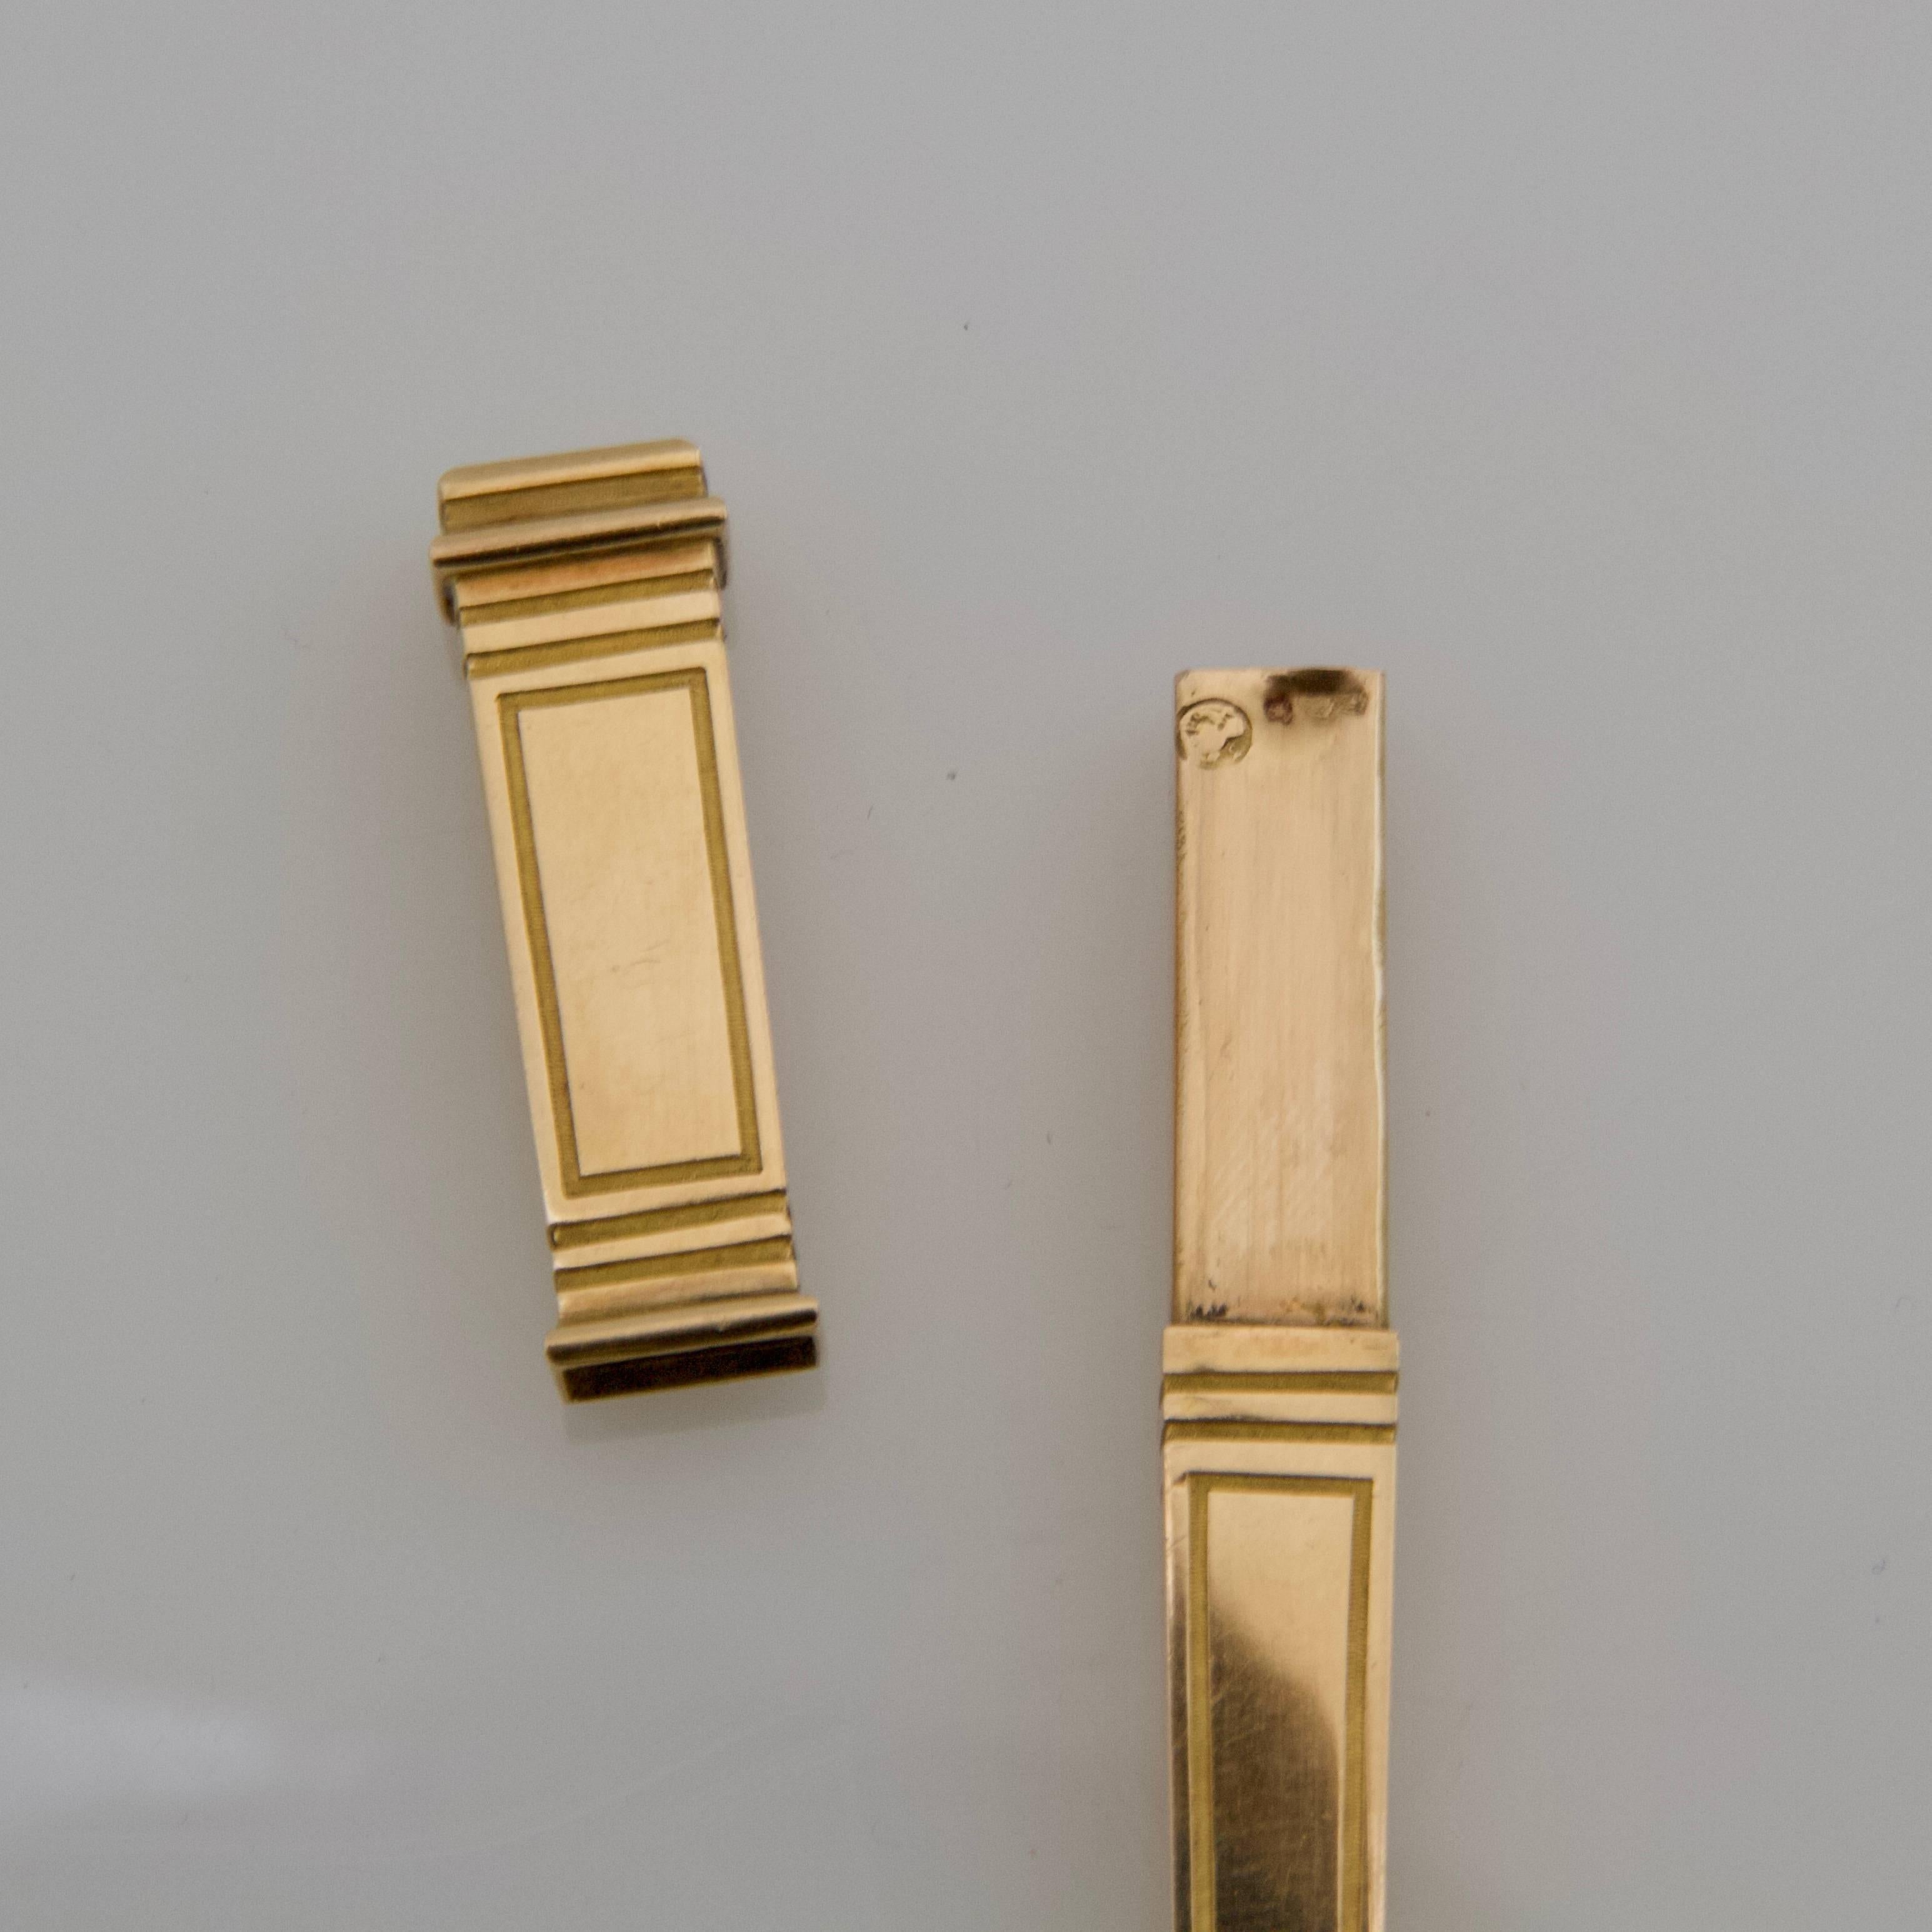 One geometrical gold needle case made in Paris between 1809-1818, the second with flutes and foliage made in Paris between 1818-1838.
French assay marks. 
Maker mark illegible.
Ref: C.Inv

Weight 7.9 g and 5 g
Size: 7.3 cm and 7 cm.